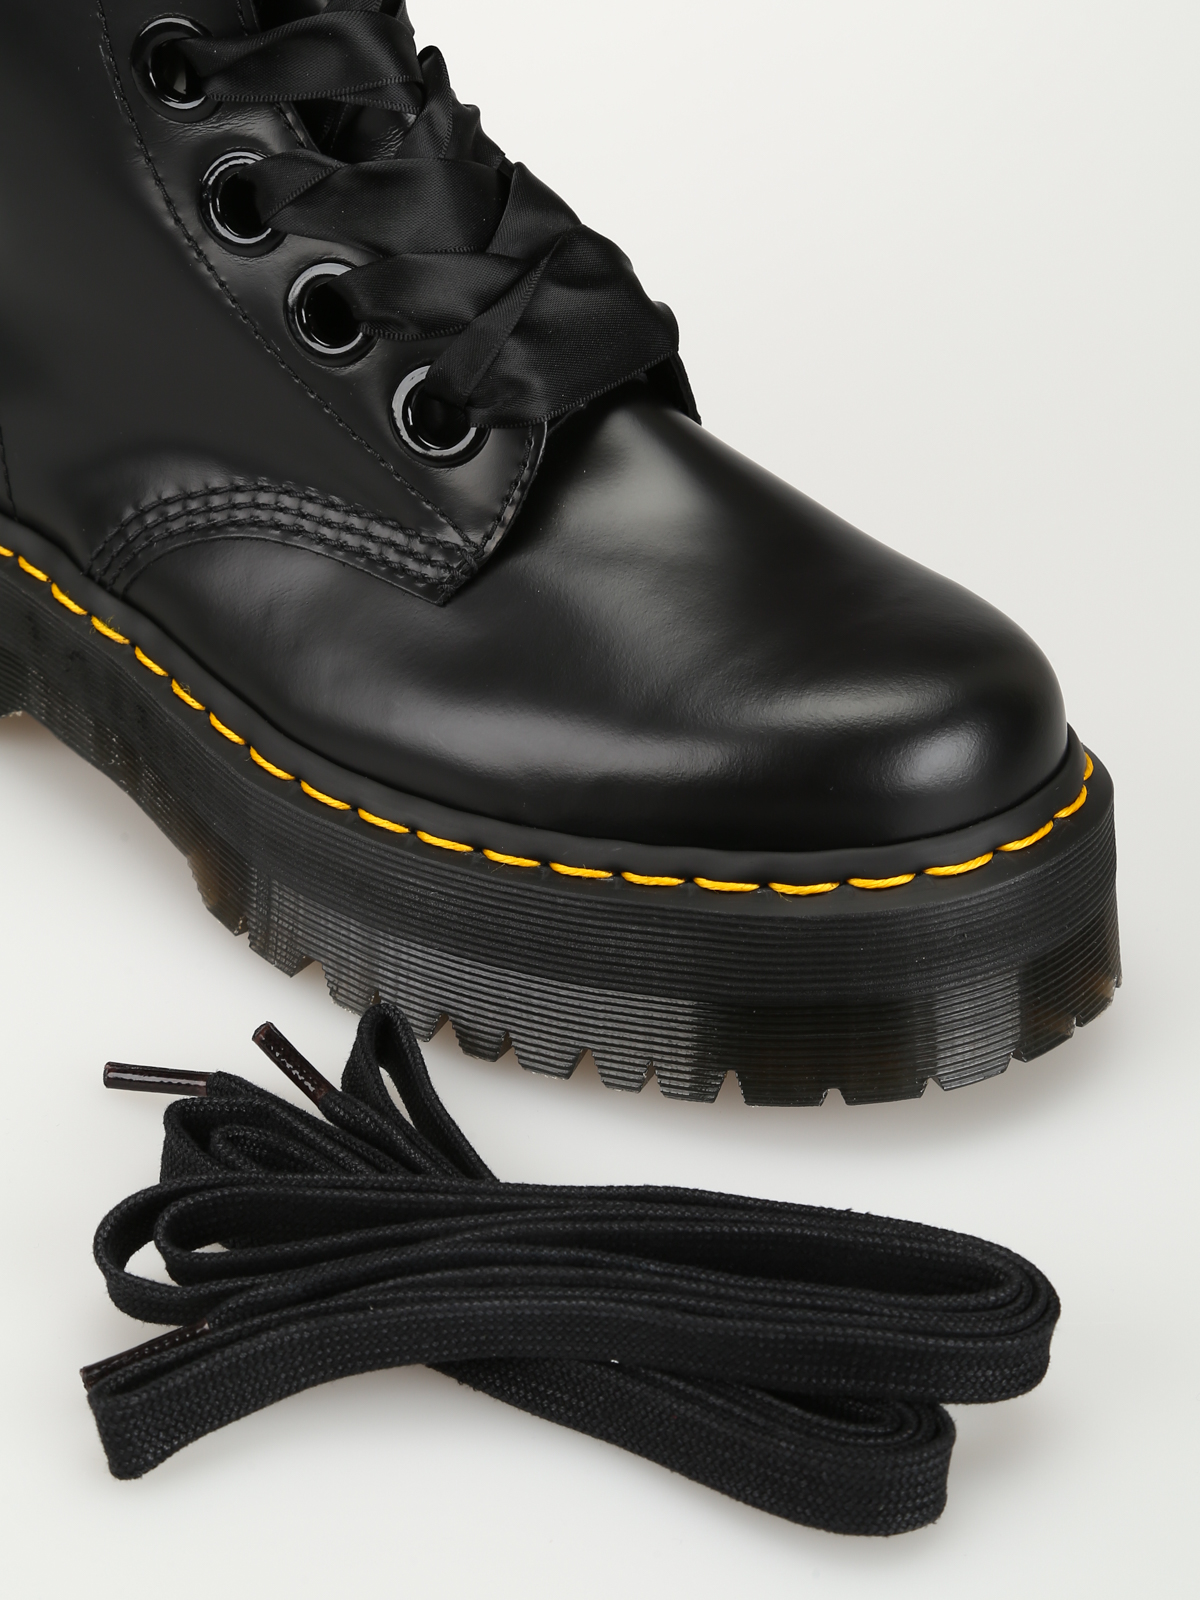 prepare Derivation Arbitrage Ankle boots Dr. Martens - Molly ankle boots - 24861001 | iKRIX.com